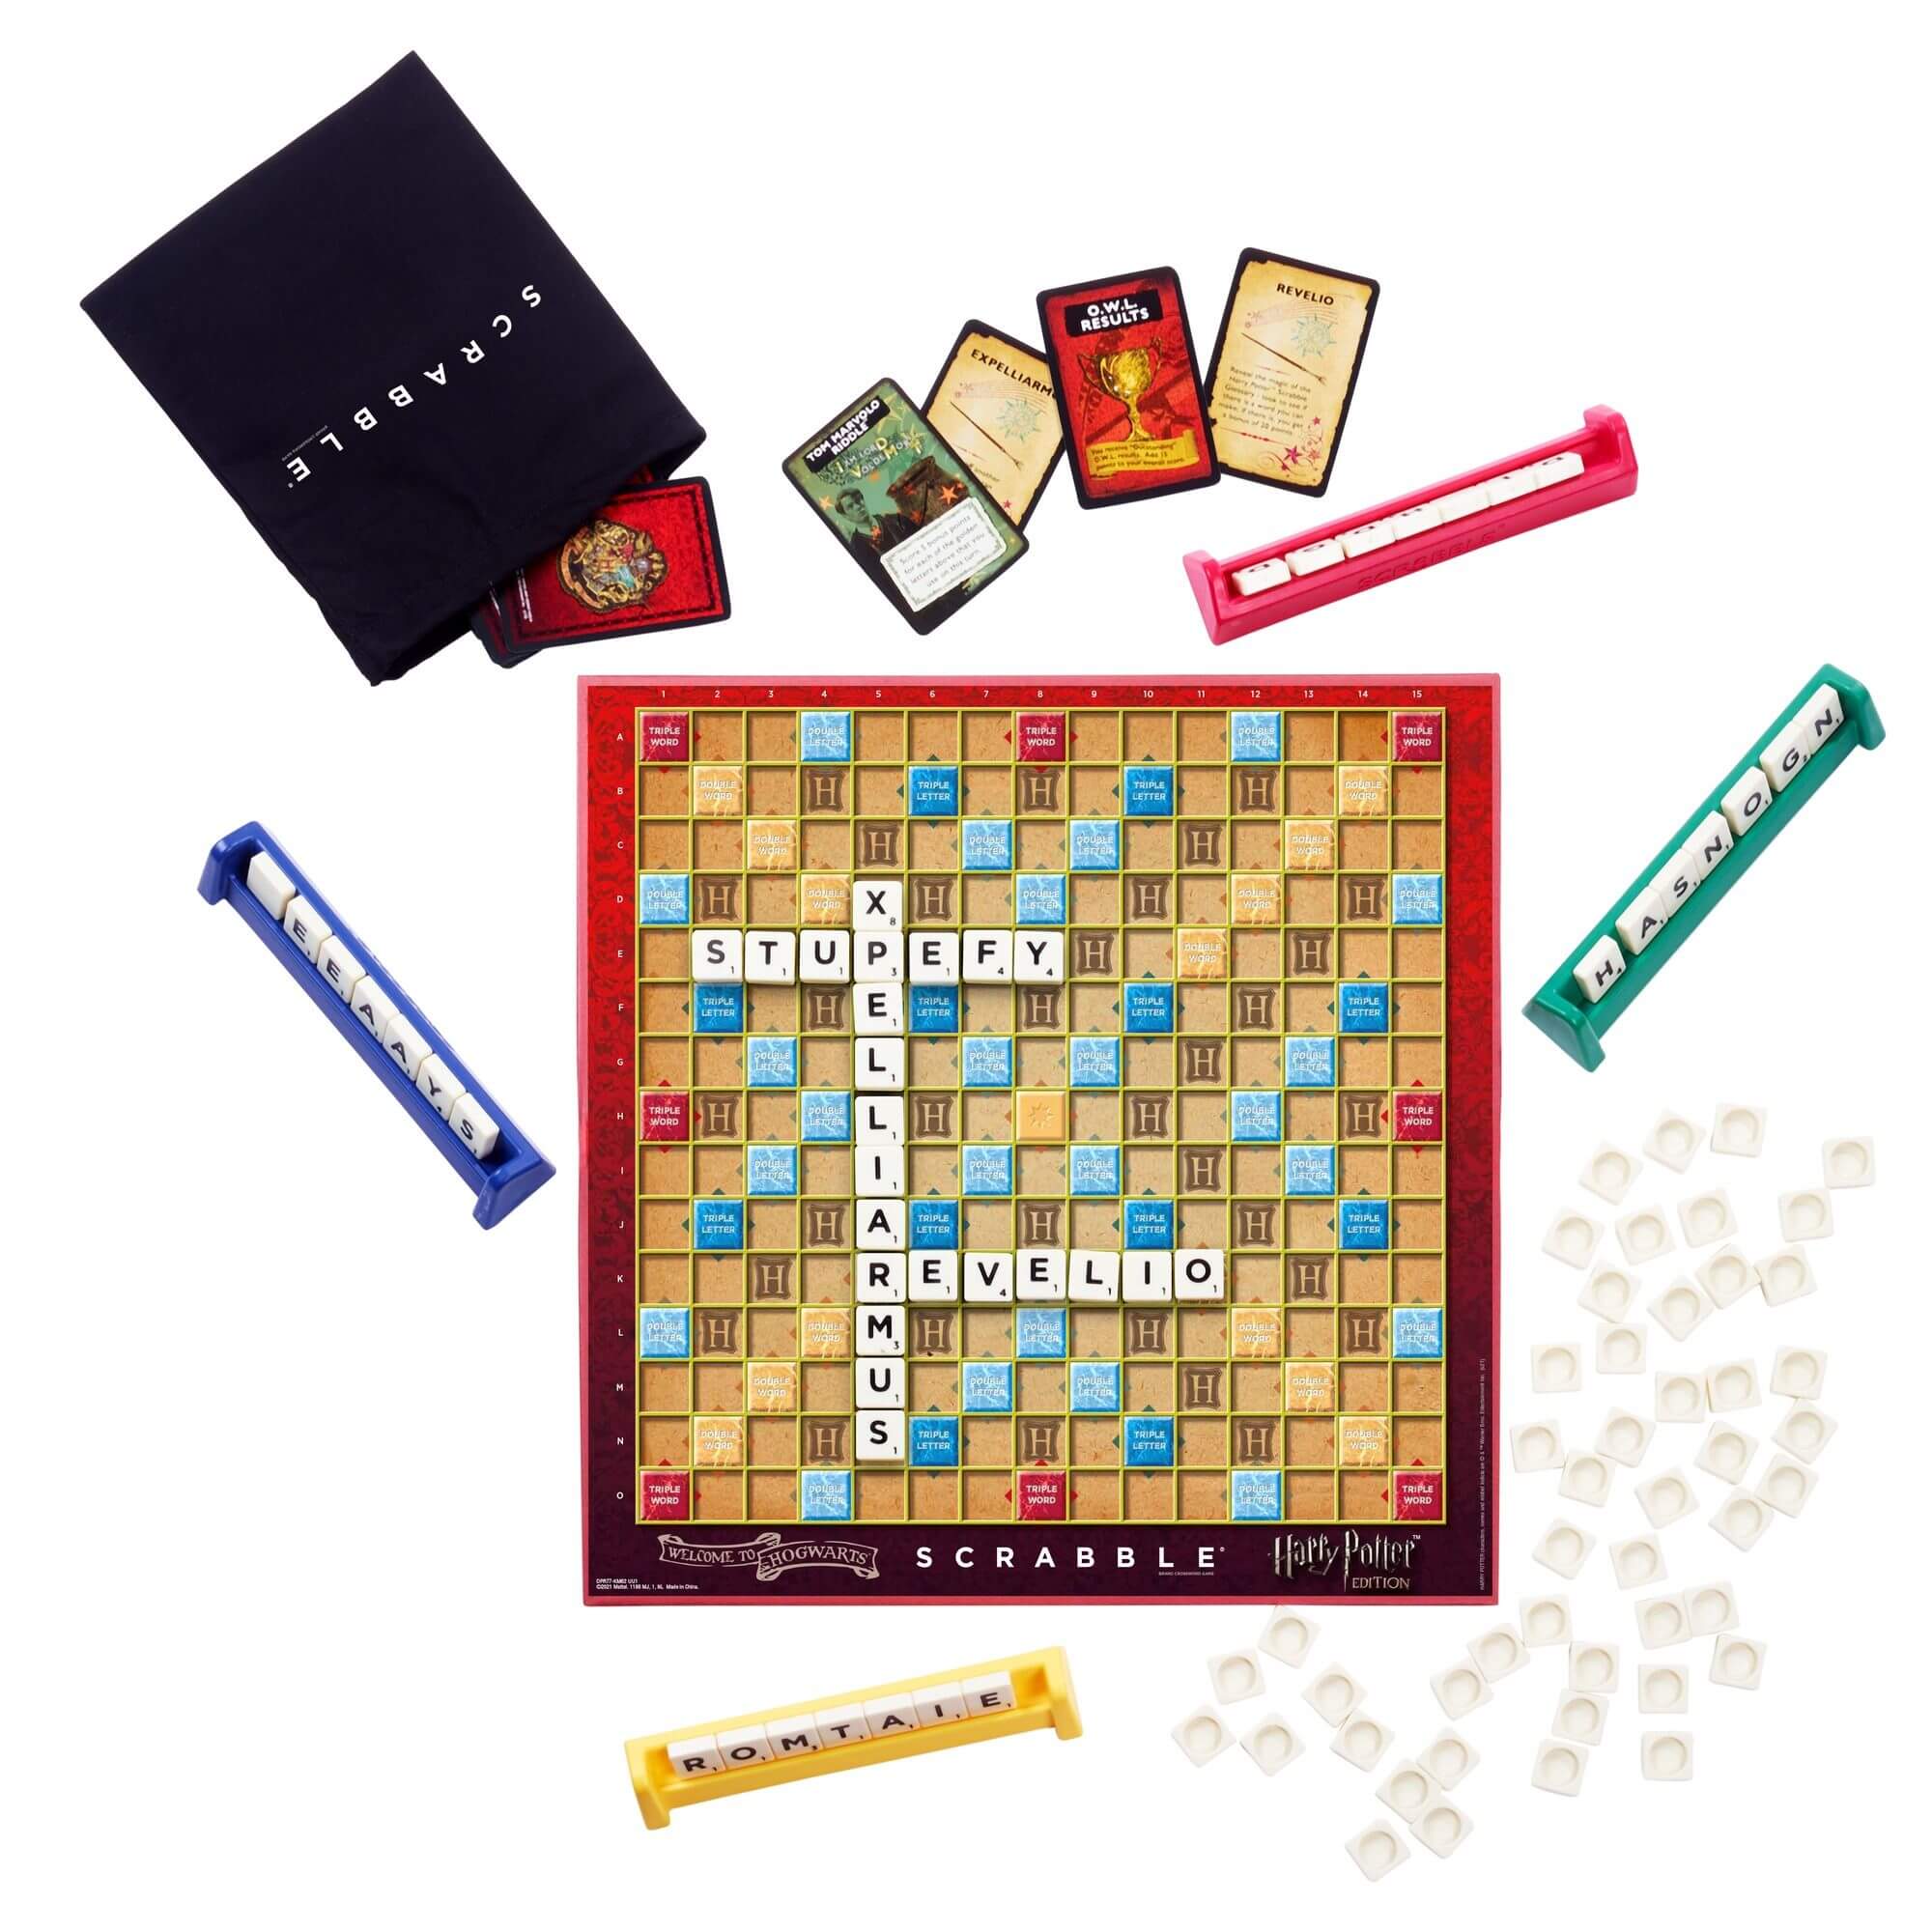 Harry Potter Scrabble - word game for kids from mattel